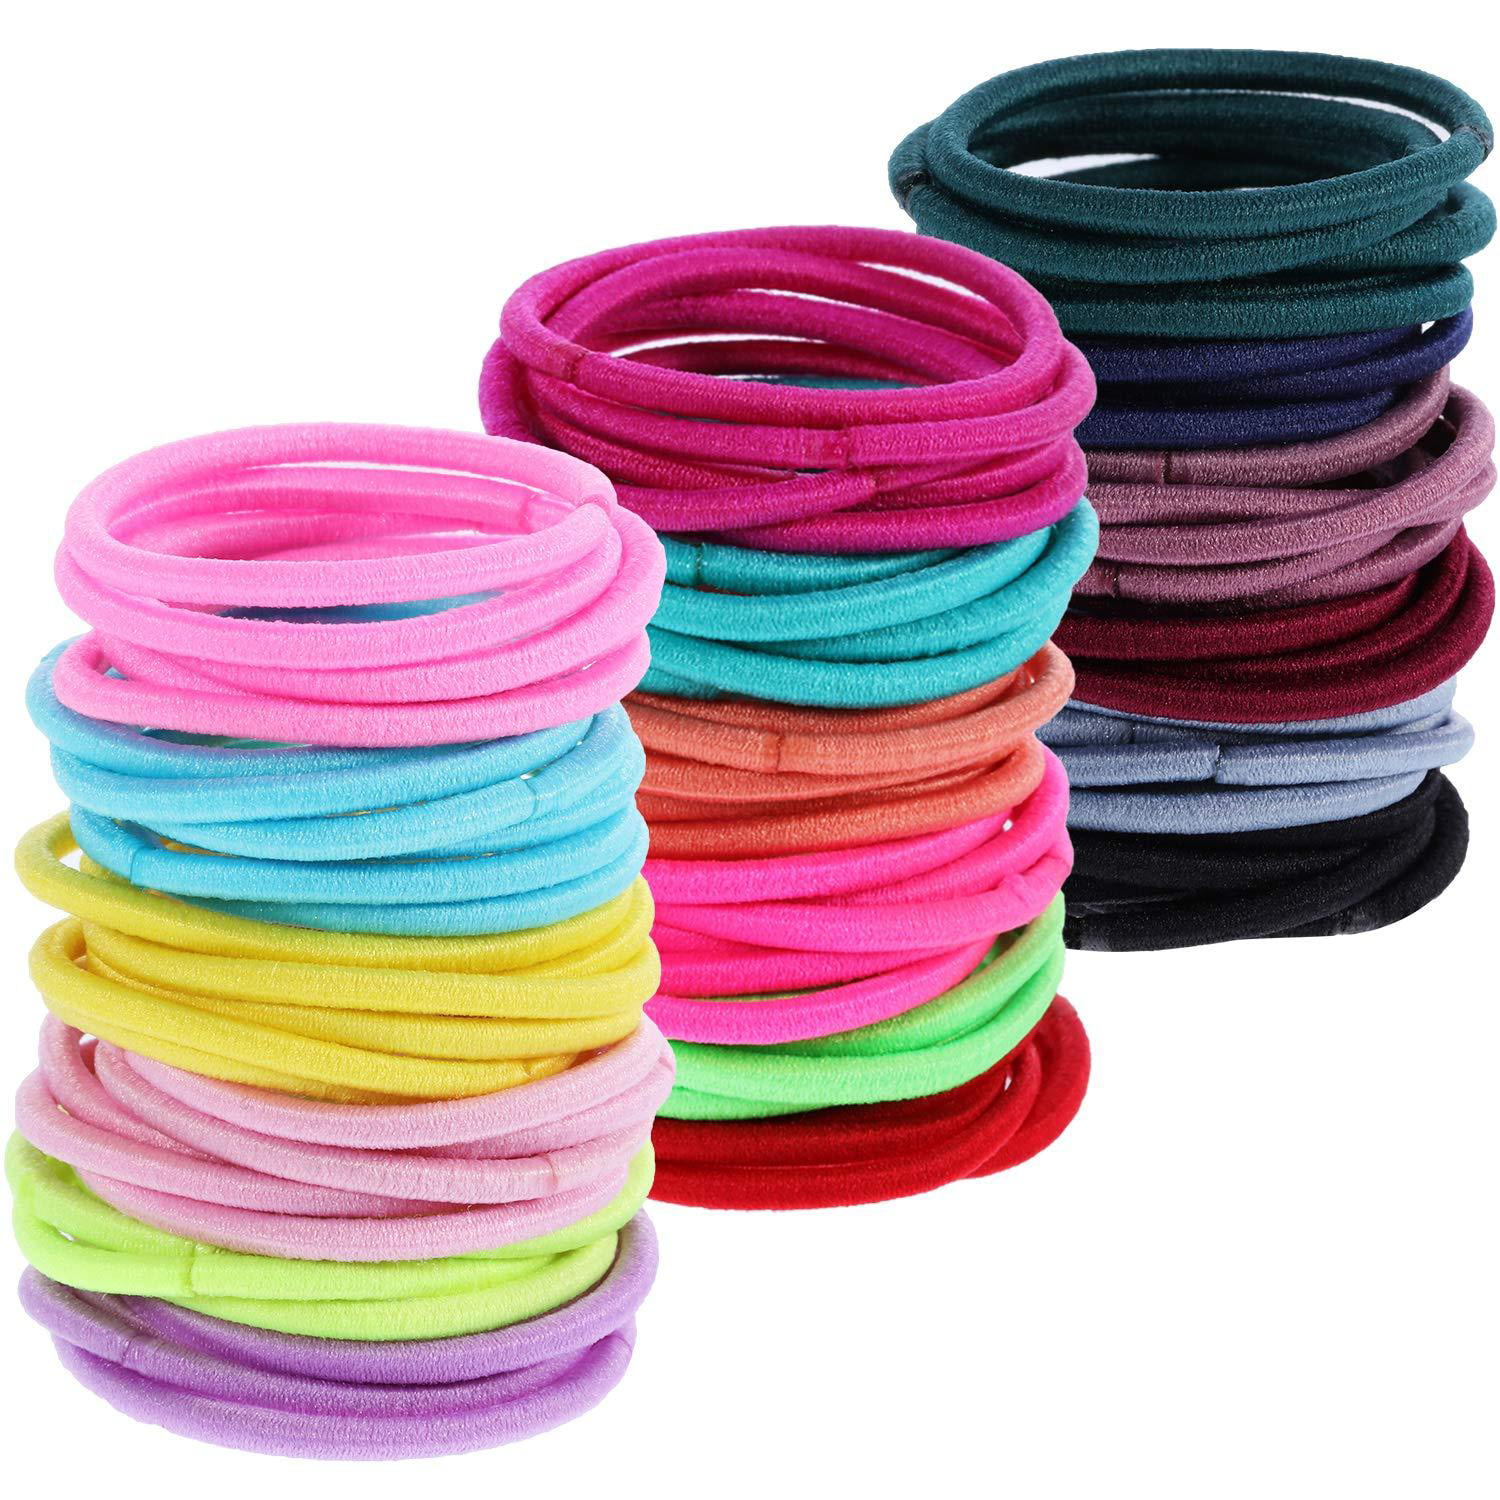 Details about   Bracelets Hair Ties Elastic Multicolor Silicone for Girls Toddlers Women 100Pcs 